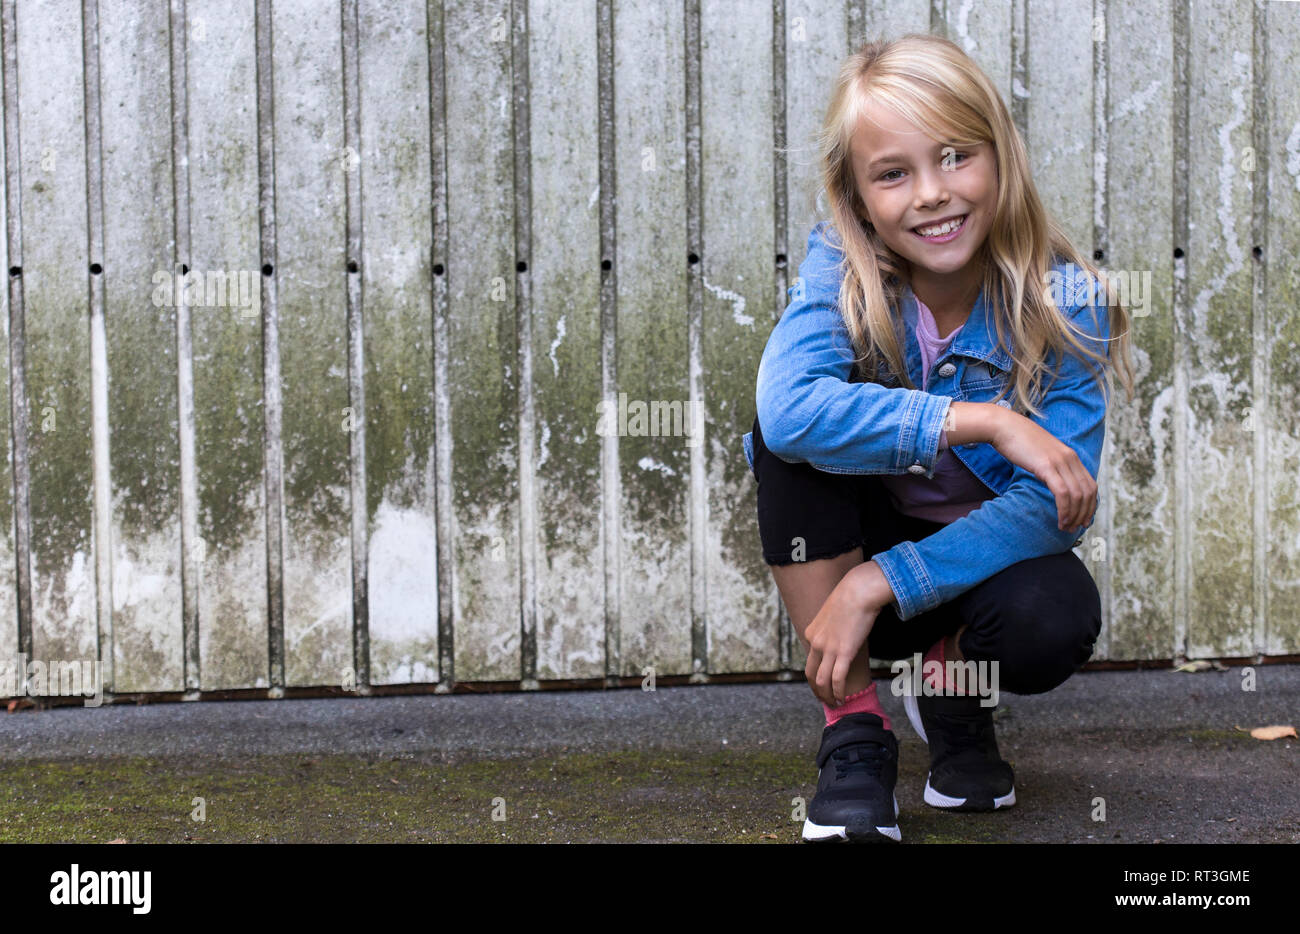 Portrait of smiling blond girl crouching in front of wooden wall Stock Photo